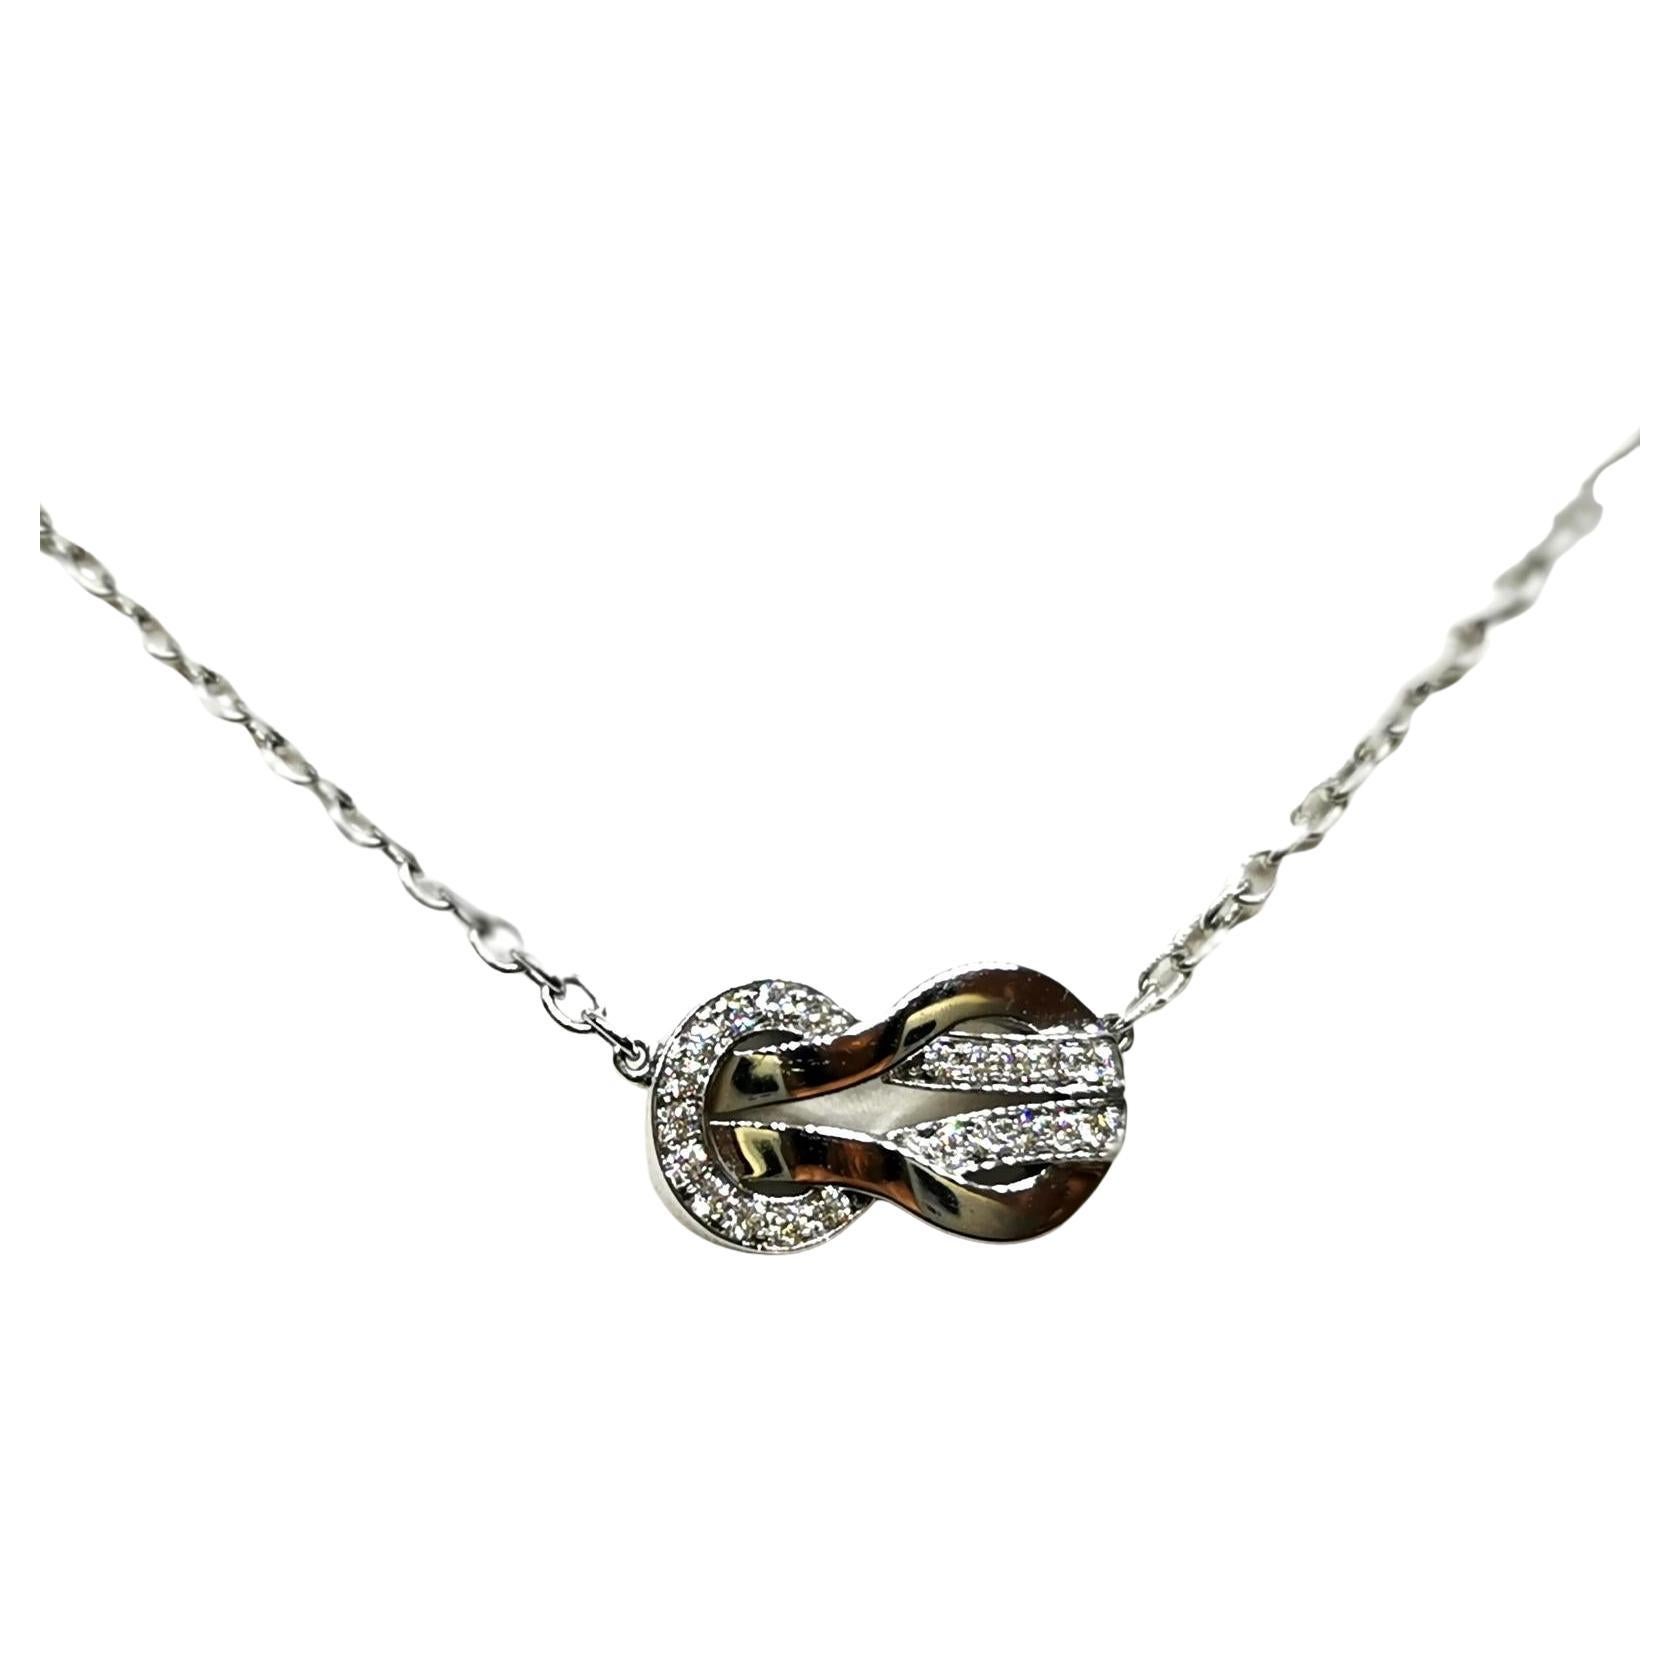 Necklace Signed by Fred, White Gold 750 Thousandths '18 Carats'